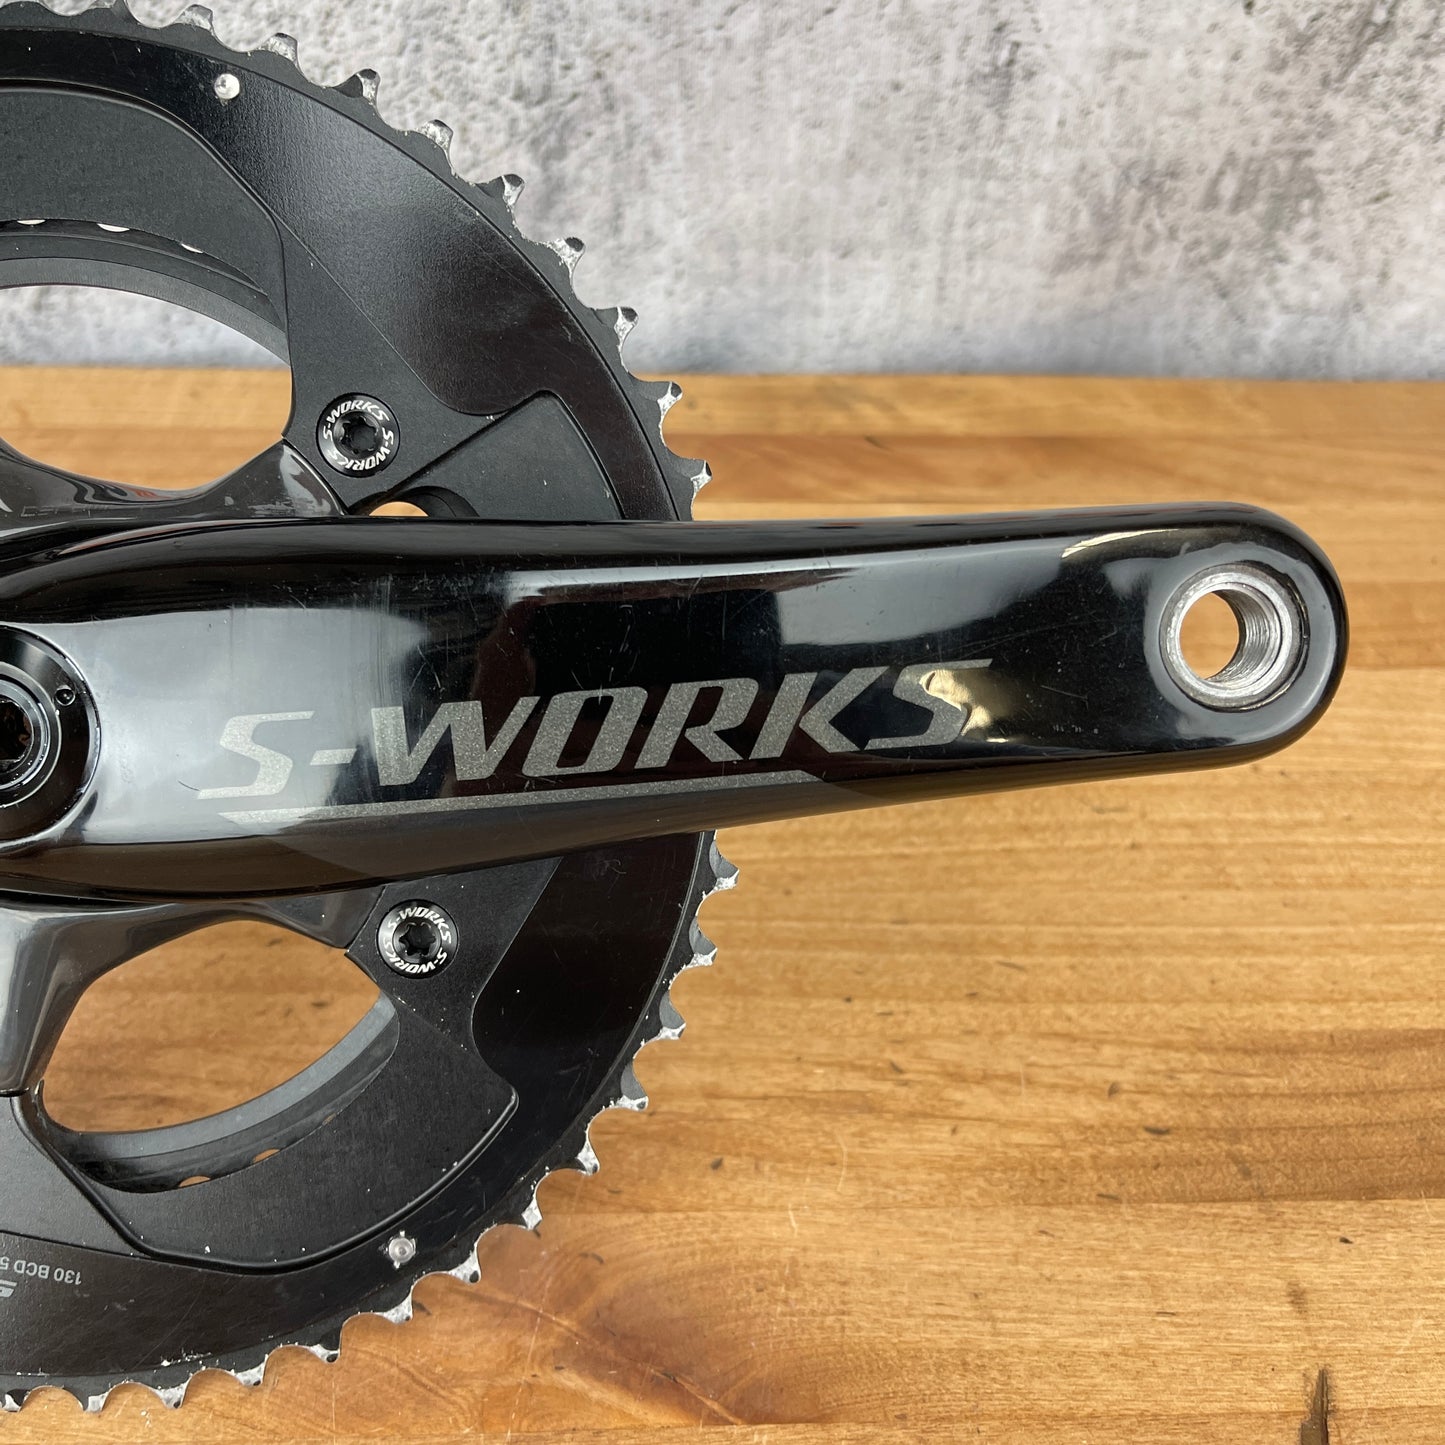 Specialized S-works Power FACT Carbon 172.5mm 53/39t 11-Speed Crankset 655g